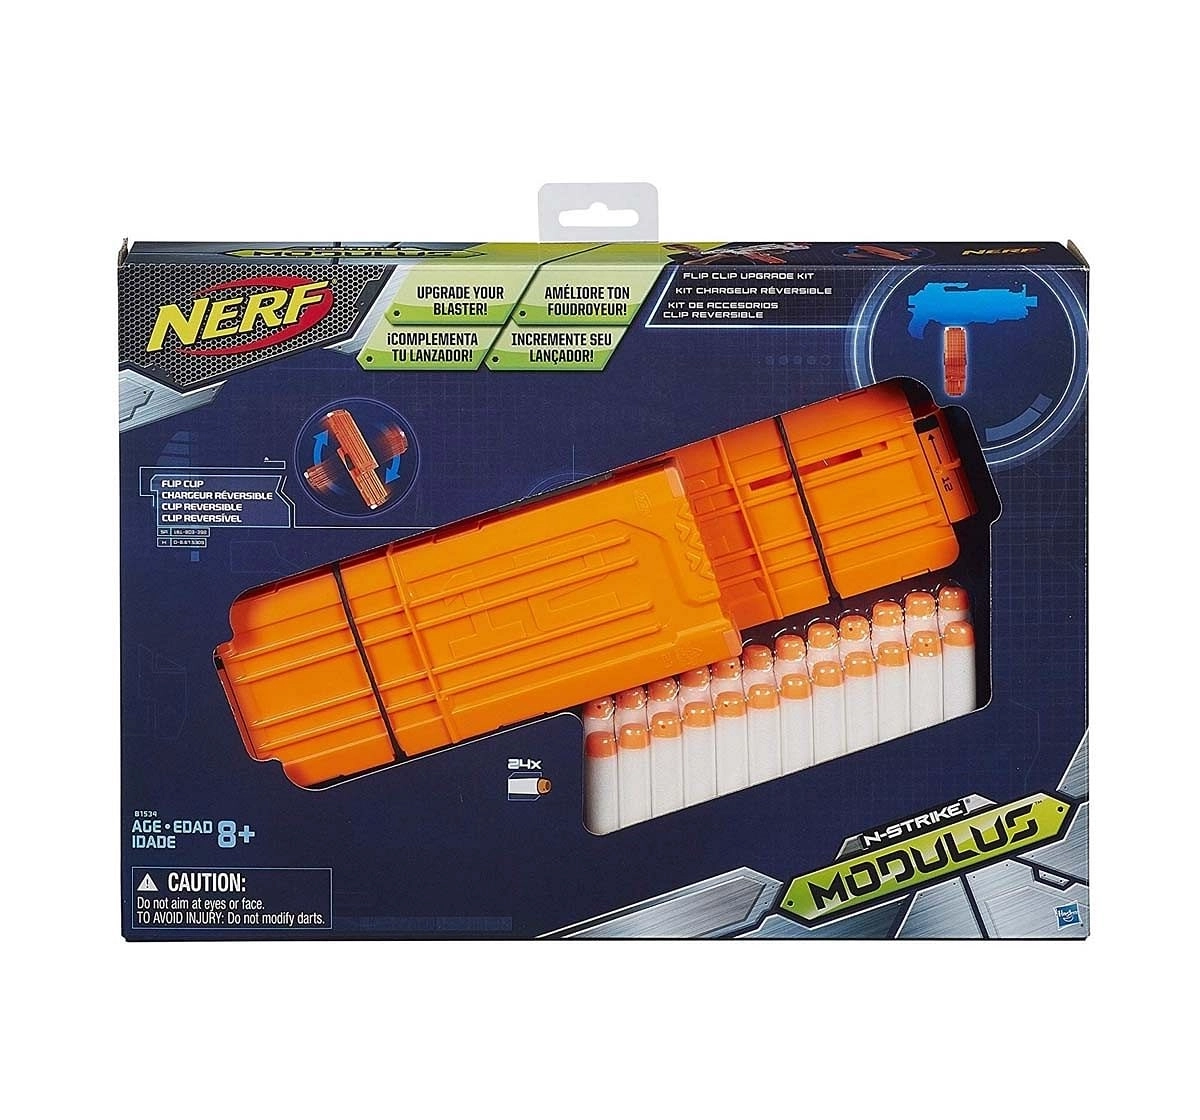 Nerf Modulus Flip Clip Upgrade Kit - Includes 24-Dart Clip that Separates Into 12-Dart Clips - Comes with 24 Official Nerf Elite Darts Blasters for Kids age 8Y+ 